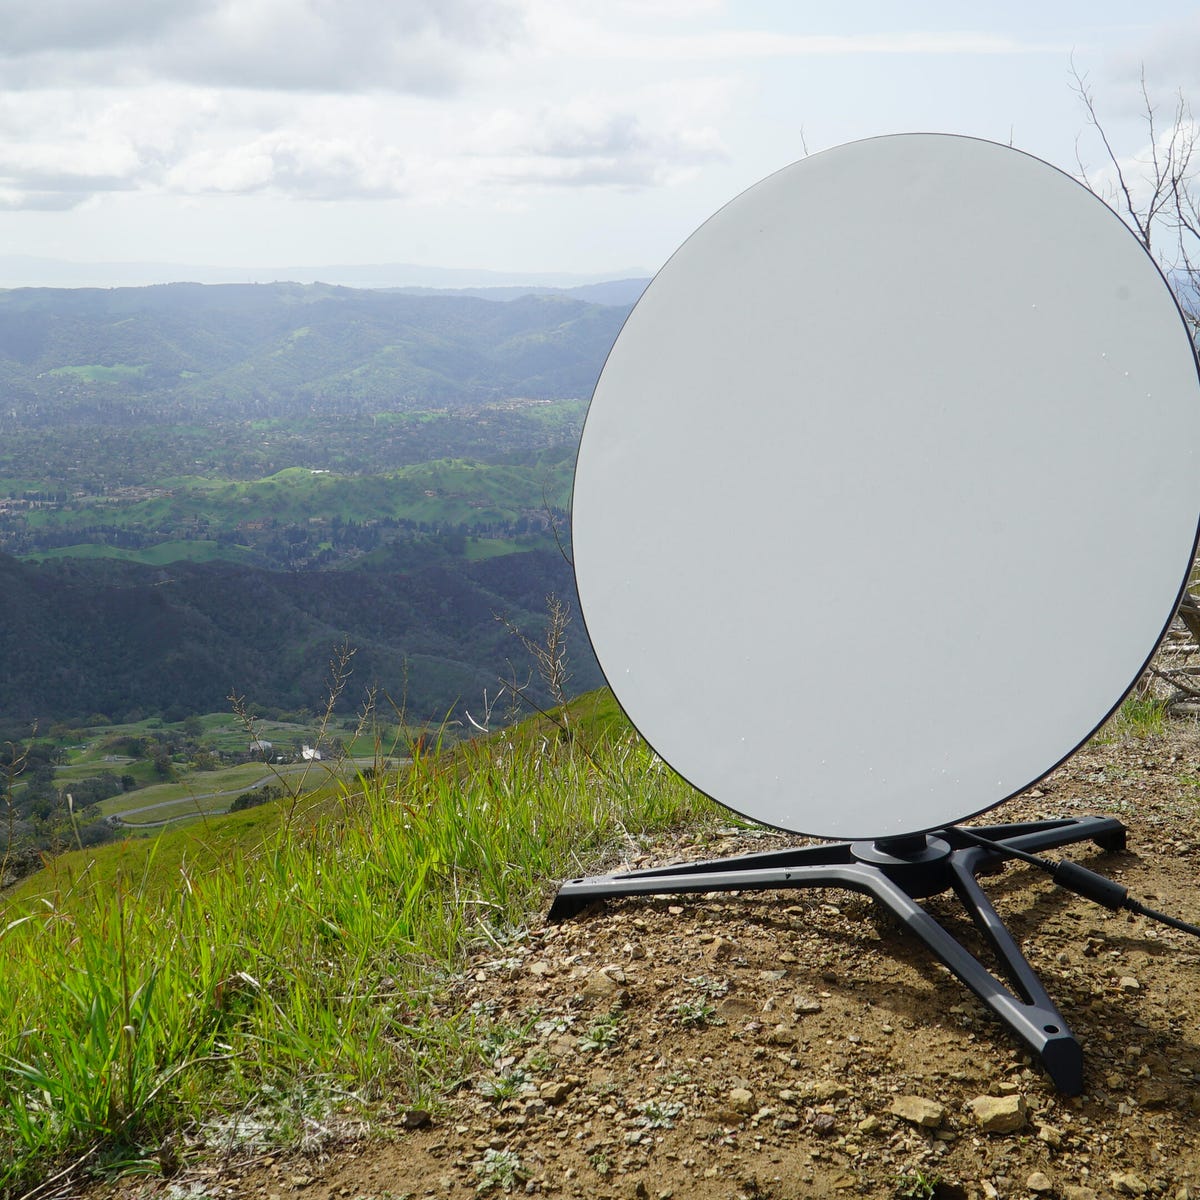 Dish Internet Plans: What Do They Offer?